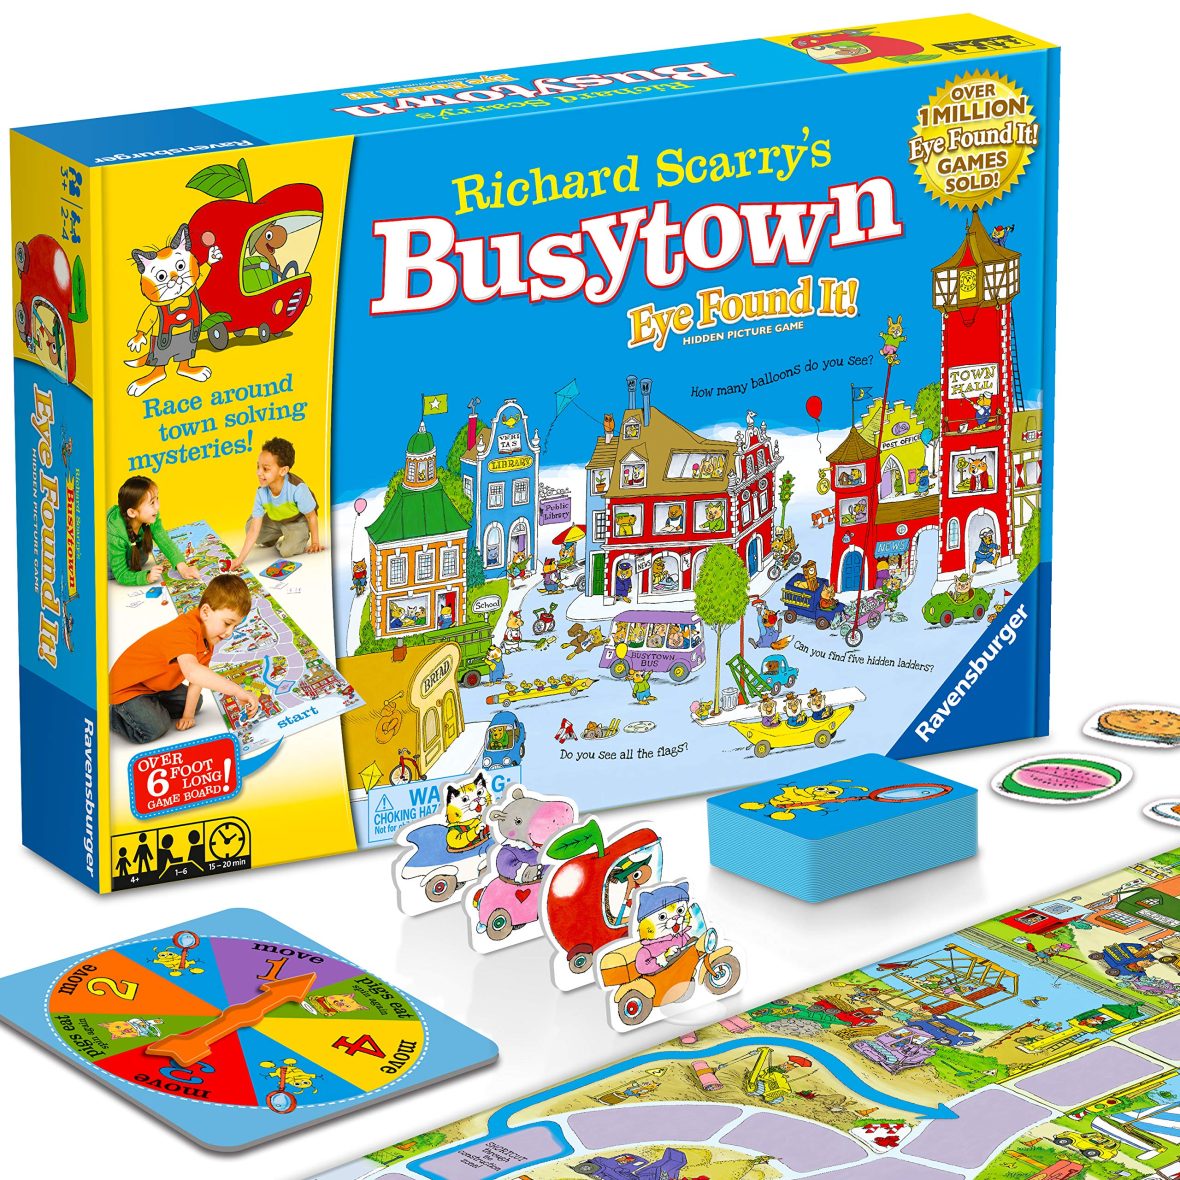 Richard Scarry’s Busytown – Eye Found It : Hidden Picture Game